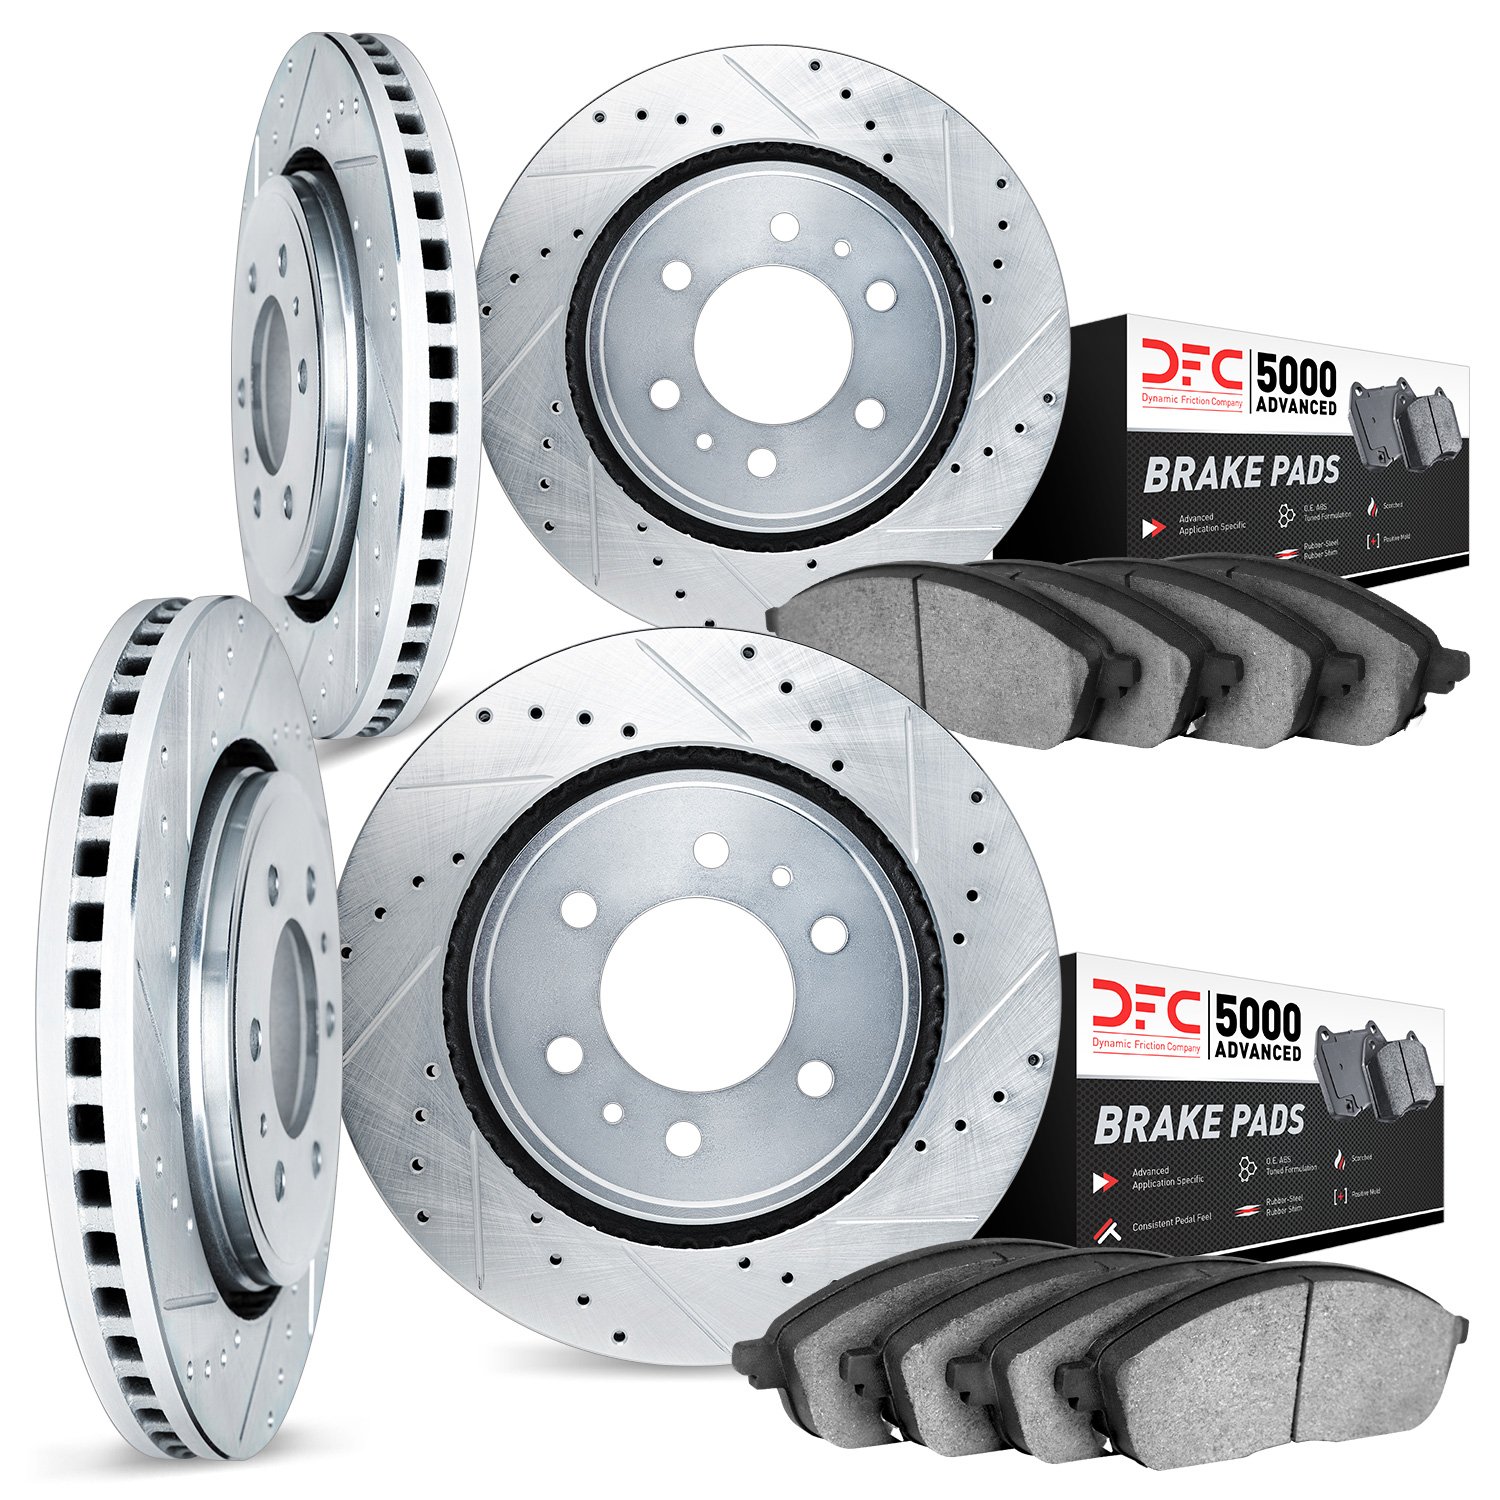 7504-48006 Drilled/Slotted Brake Rotors w/5000 Advanced Brake Pads Kit [Silver], 2003-2005 GM, Position: Front and Rear